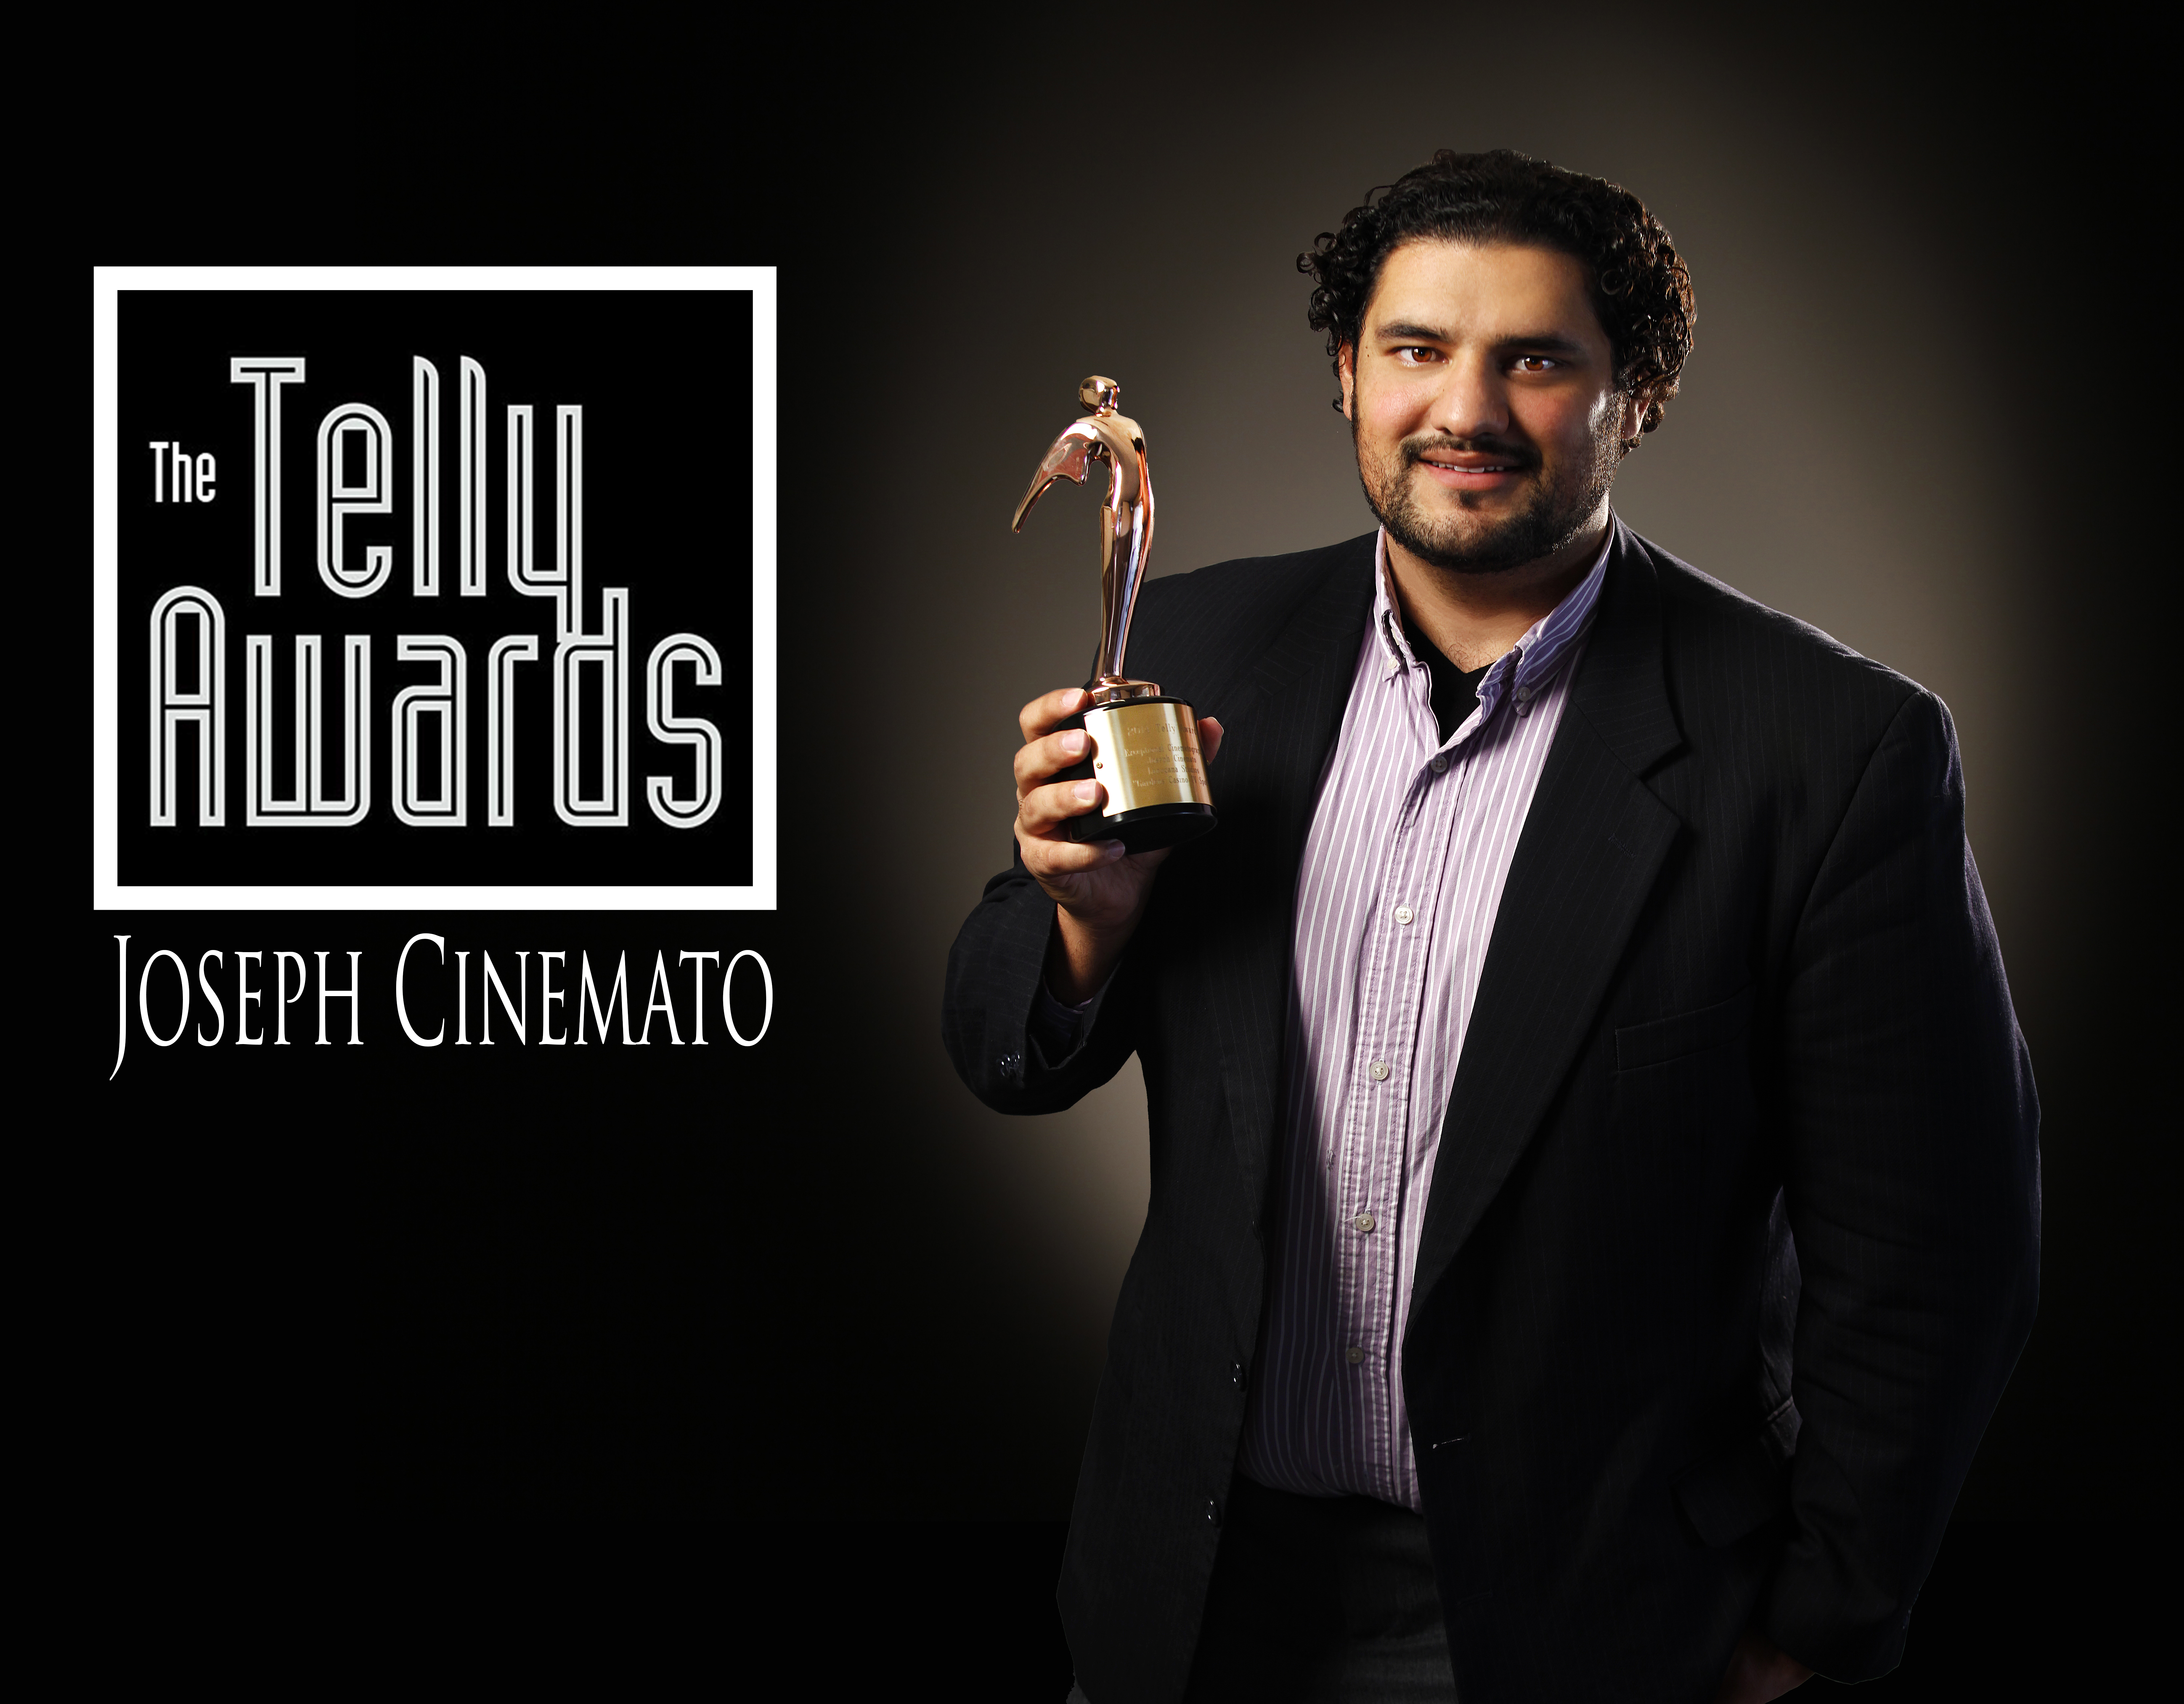 Joseph Cinemato awarded a 'TELLY AWARD' for an International TV Commercial Campaign.